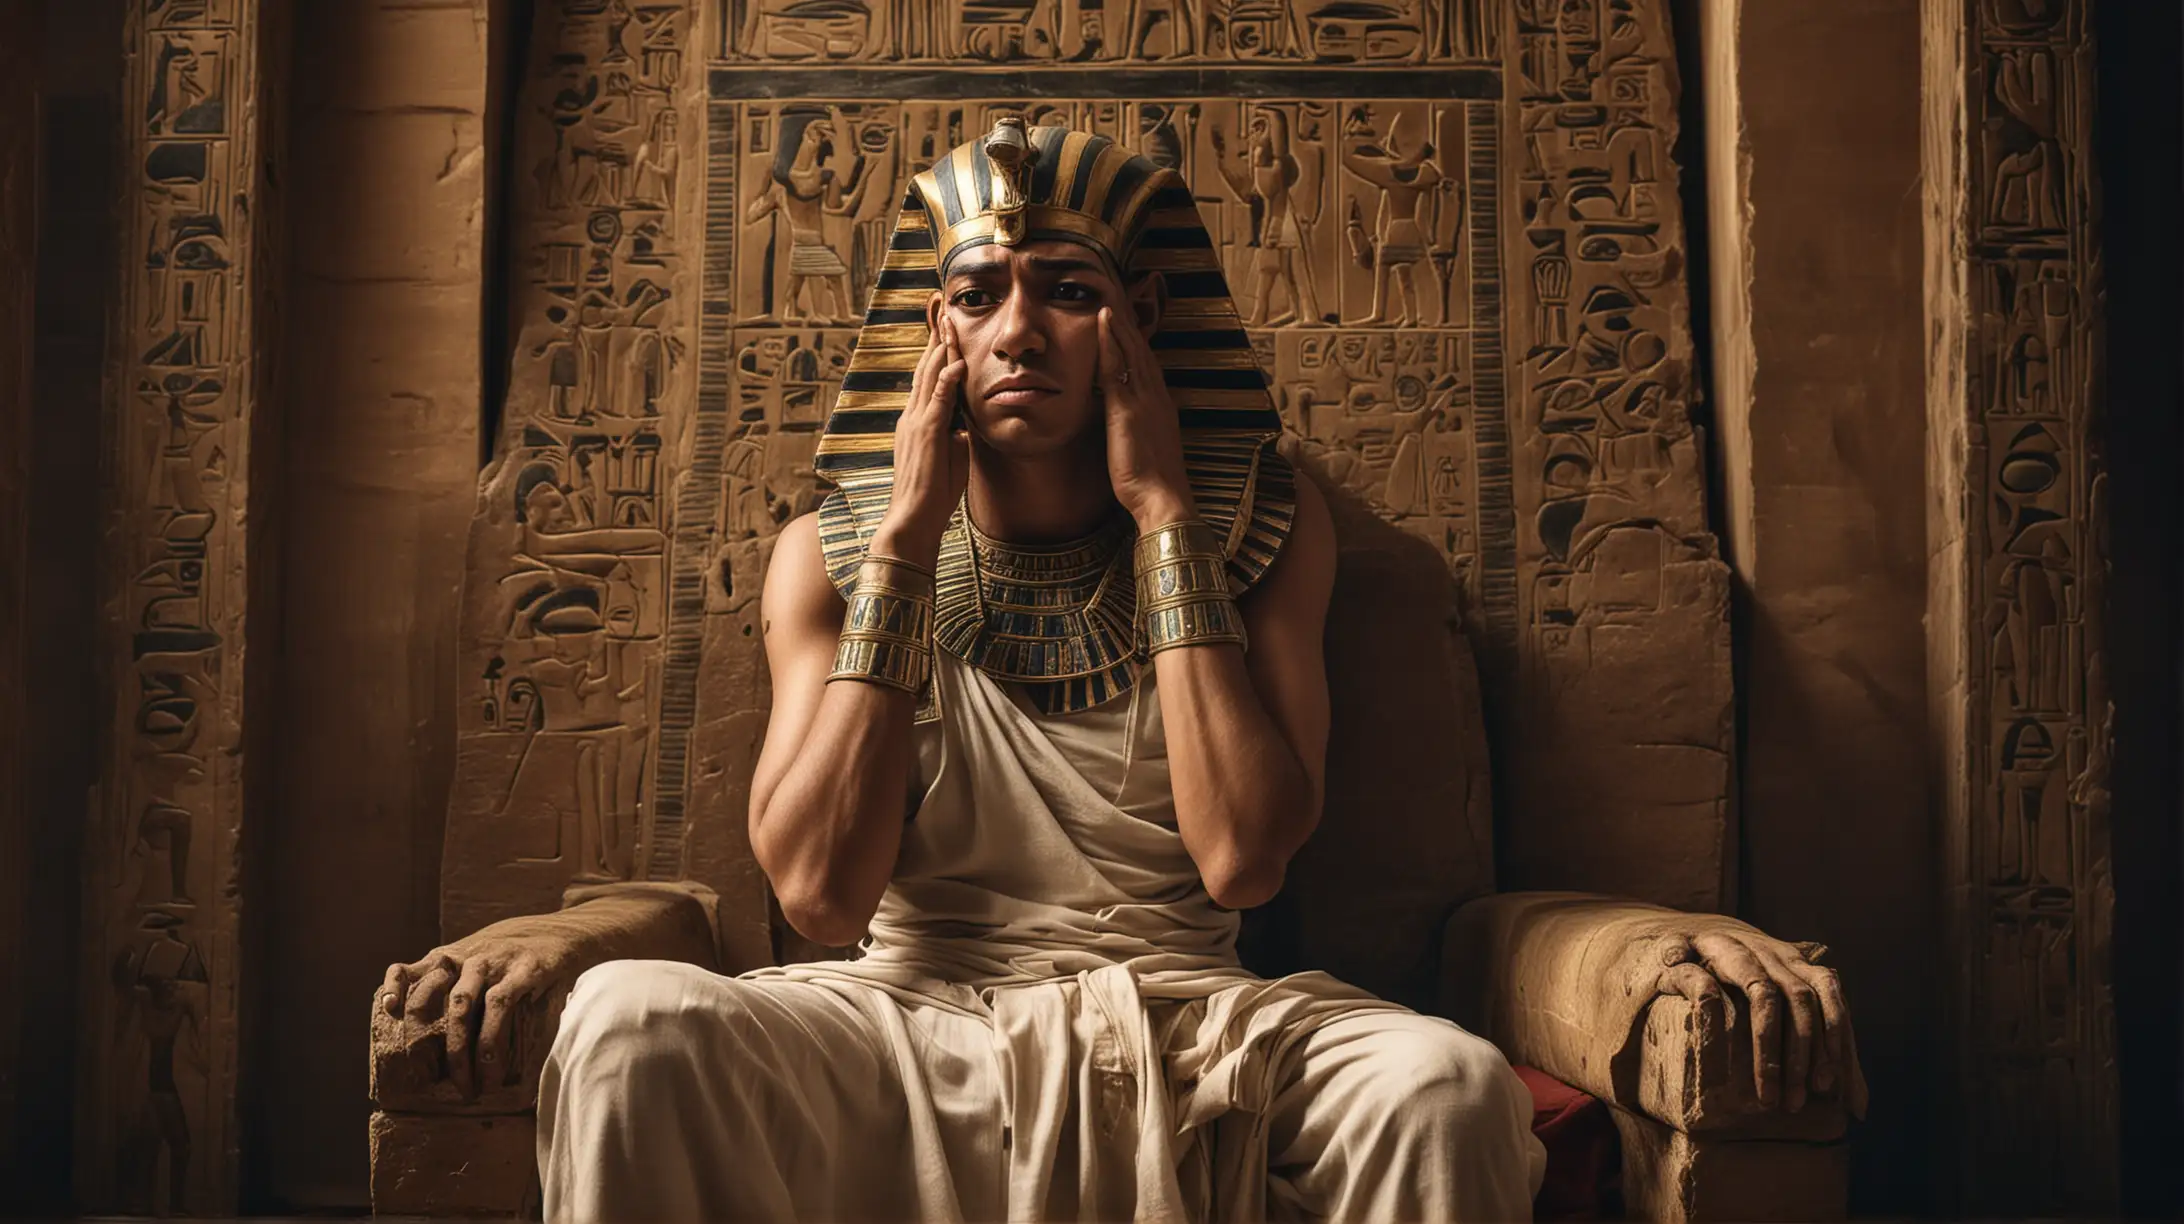 Fearful Pharaoh Sitting on Throne Eyes Covered in Anxiety and Despair